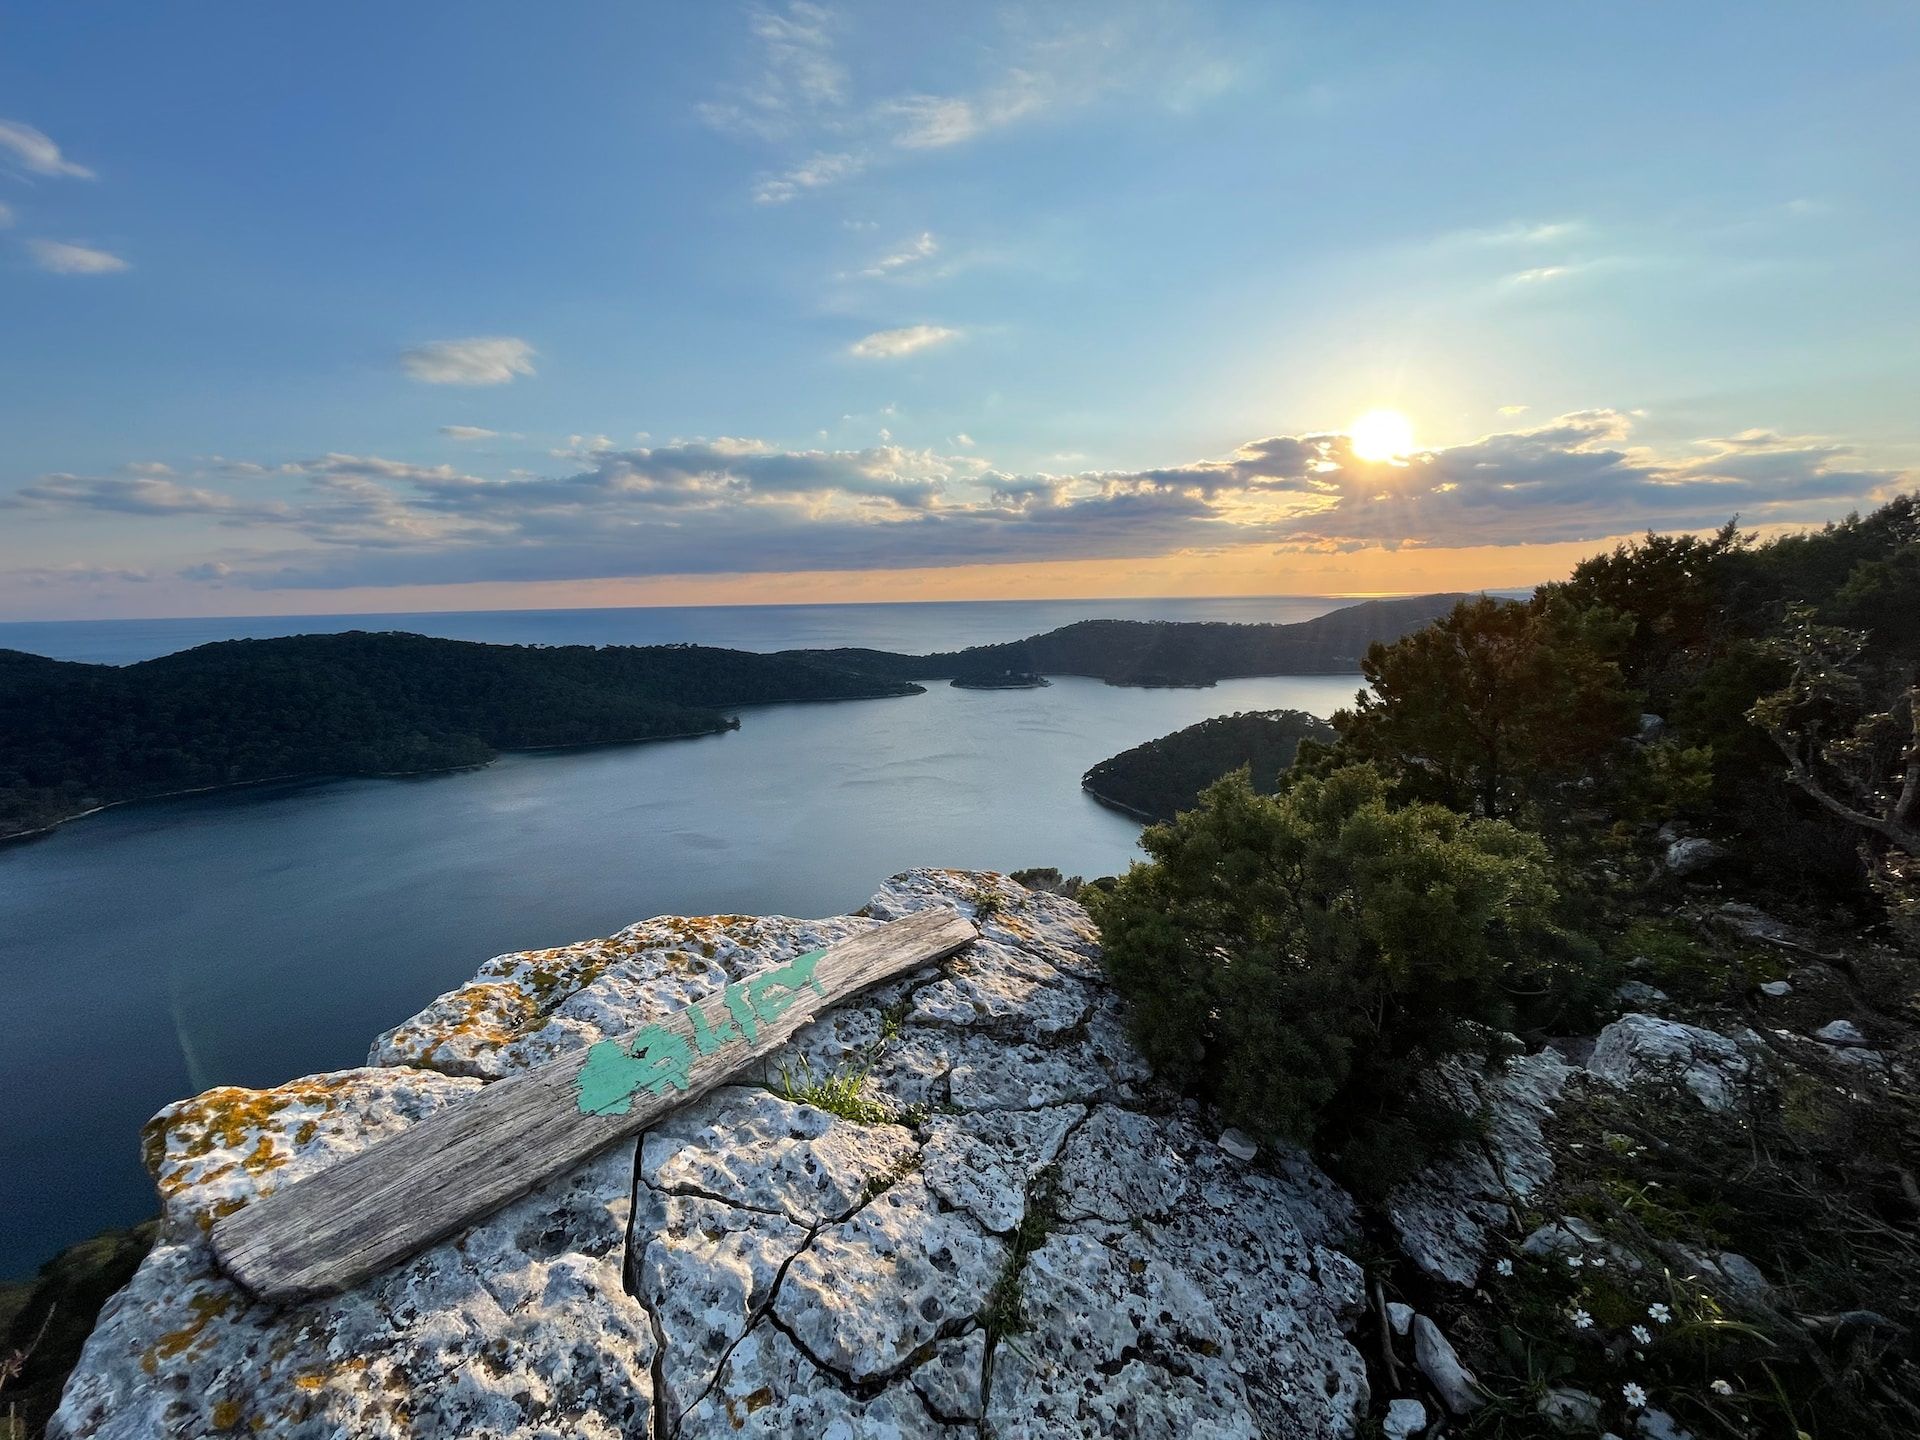 Sunset overlooking lake from a mountain in Mljet National Park